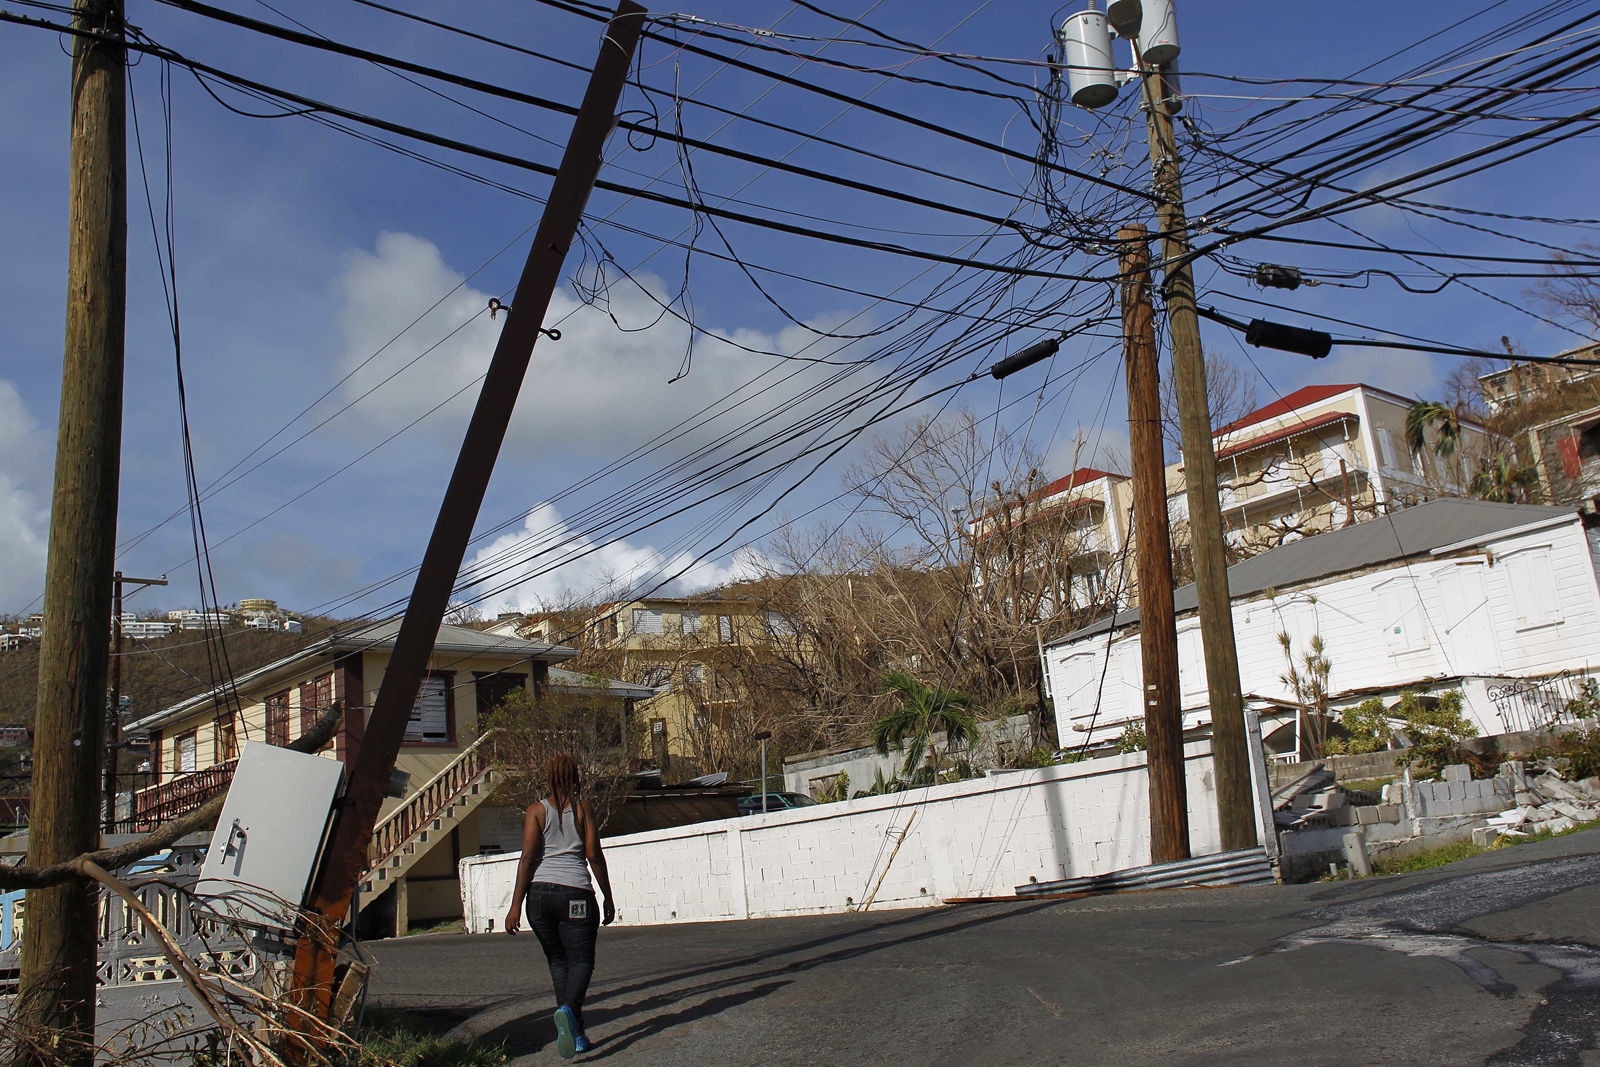 A woman walks under affected power lines after the passage of Hurricane Irma in Charlotte Amalie, St. Thomas, U.S. Virgin Islands, Sunday, Sept. 10, 2017.  The storm ravaged such lush resort islands as St. Martin, St. Barts, St. Thomas, Barbuda and Anguilla. (AP Photo/Ricardo Arduengo)